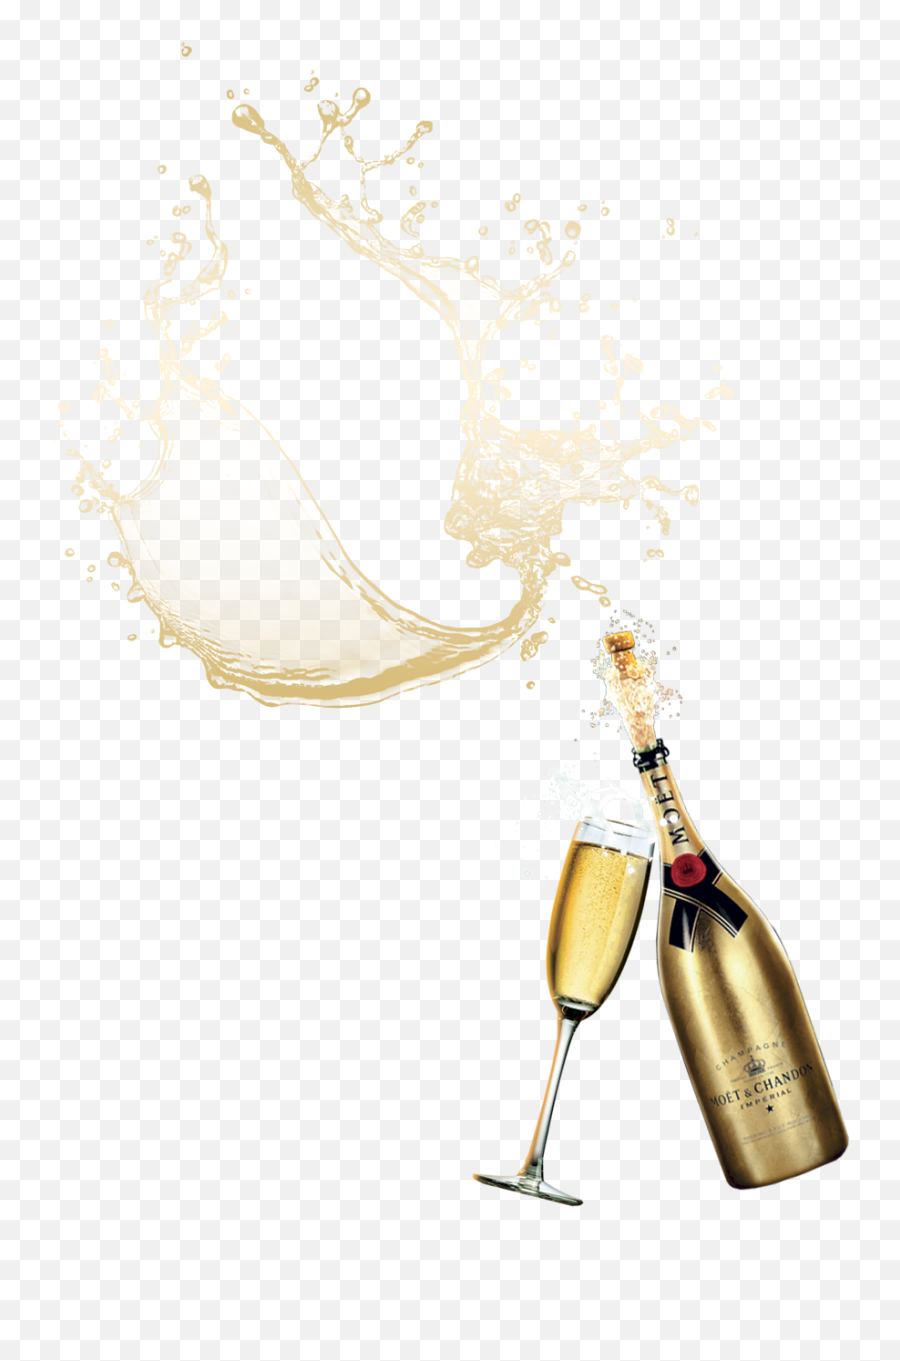 Download Free Png Champagne Splash 98 Images In - Transparent Champagne Bottle Png,Champagne Bottle Png